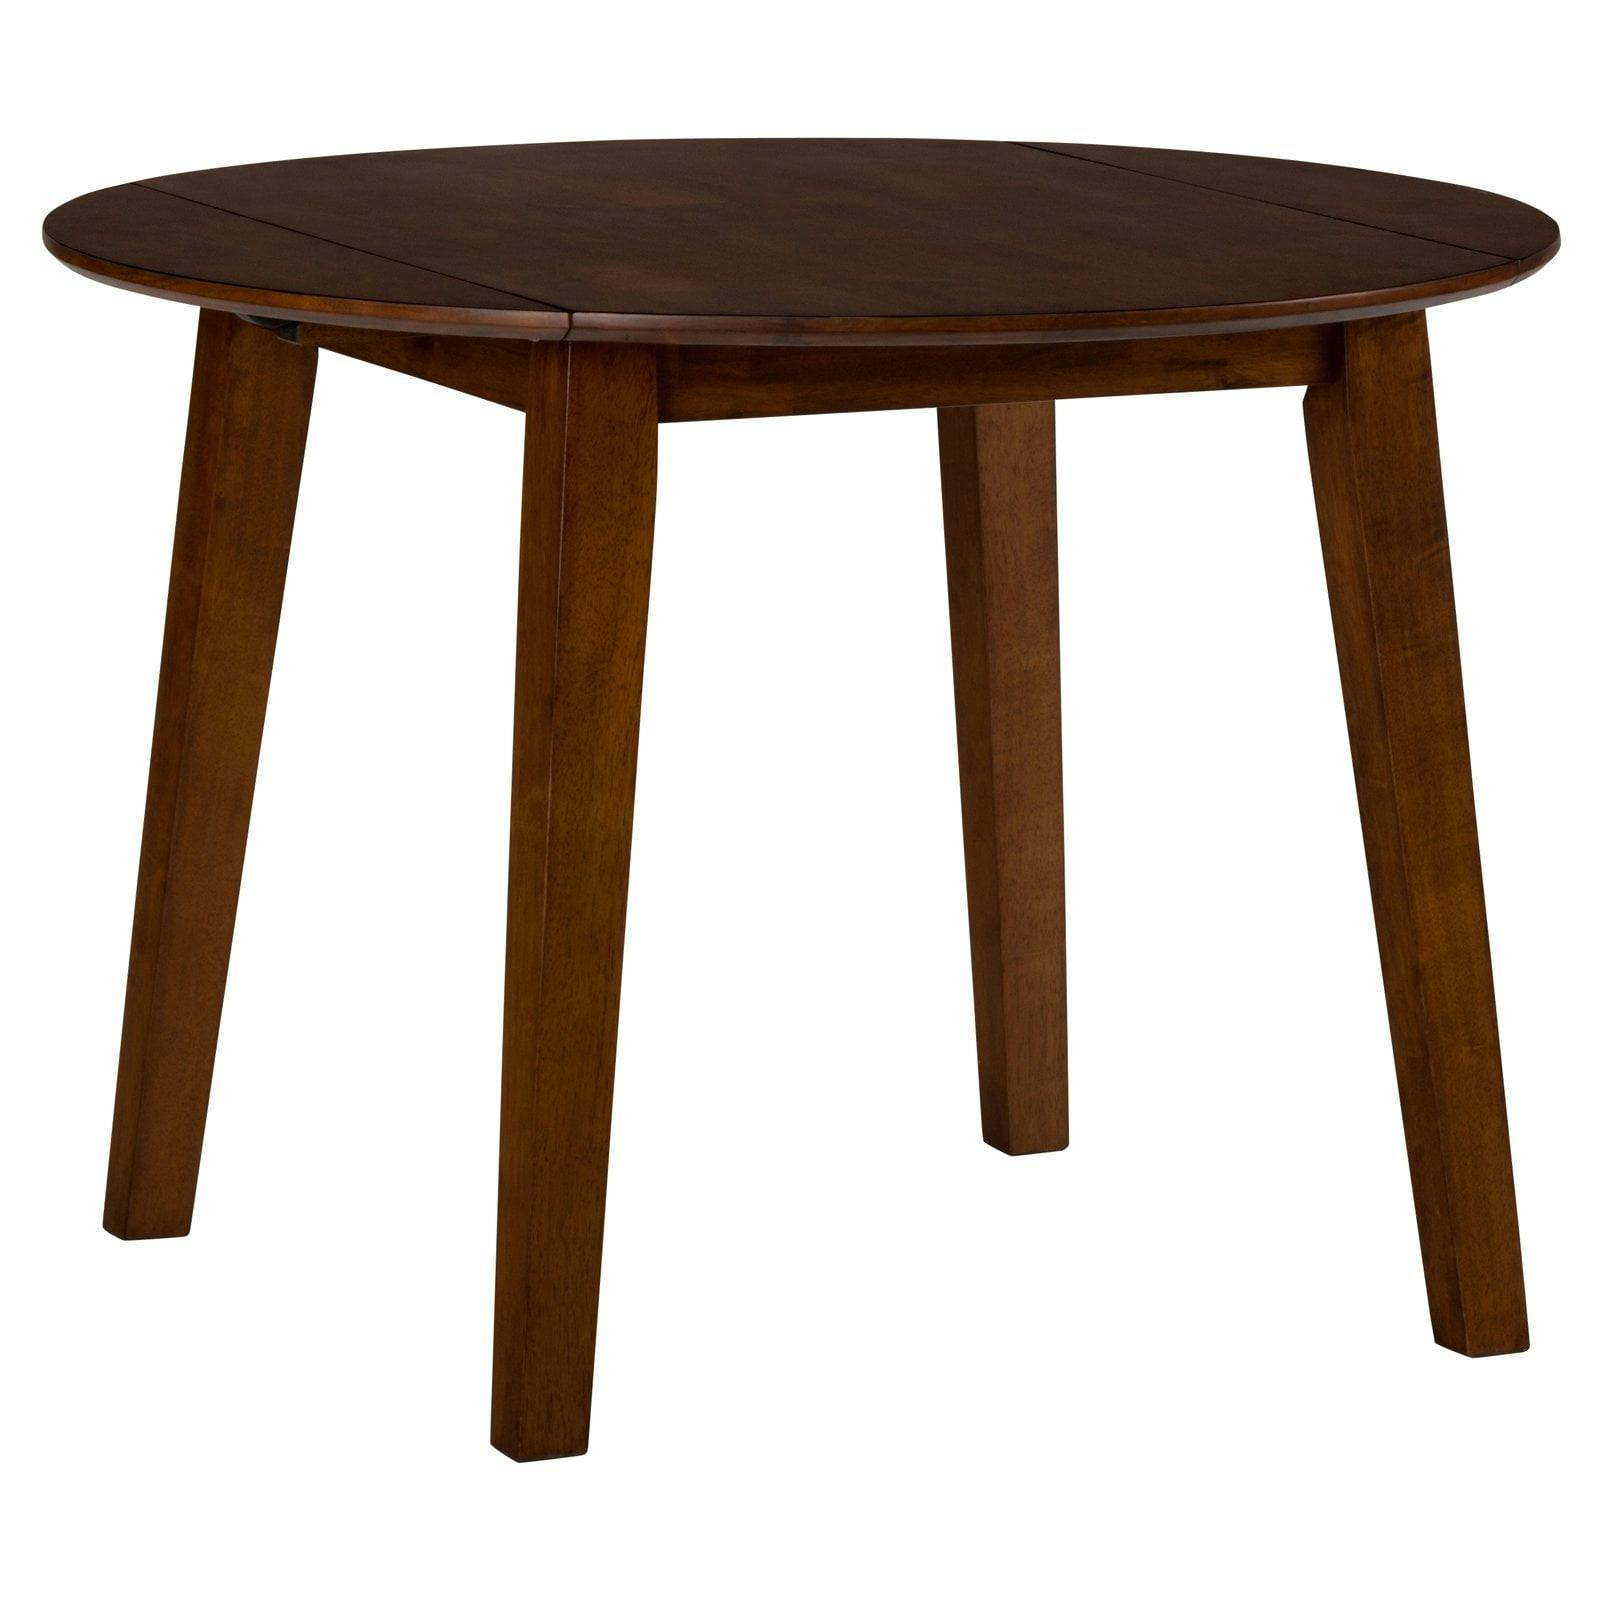 Transitional Caramel Brown Round Solid Wood Extendable Dining Table